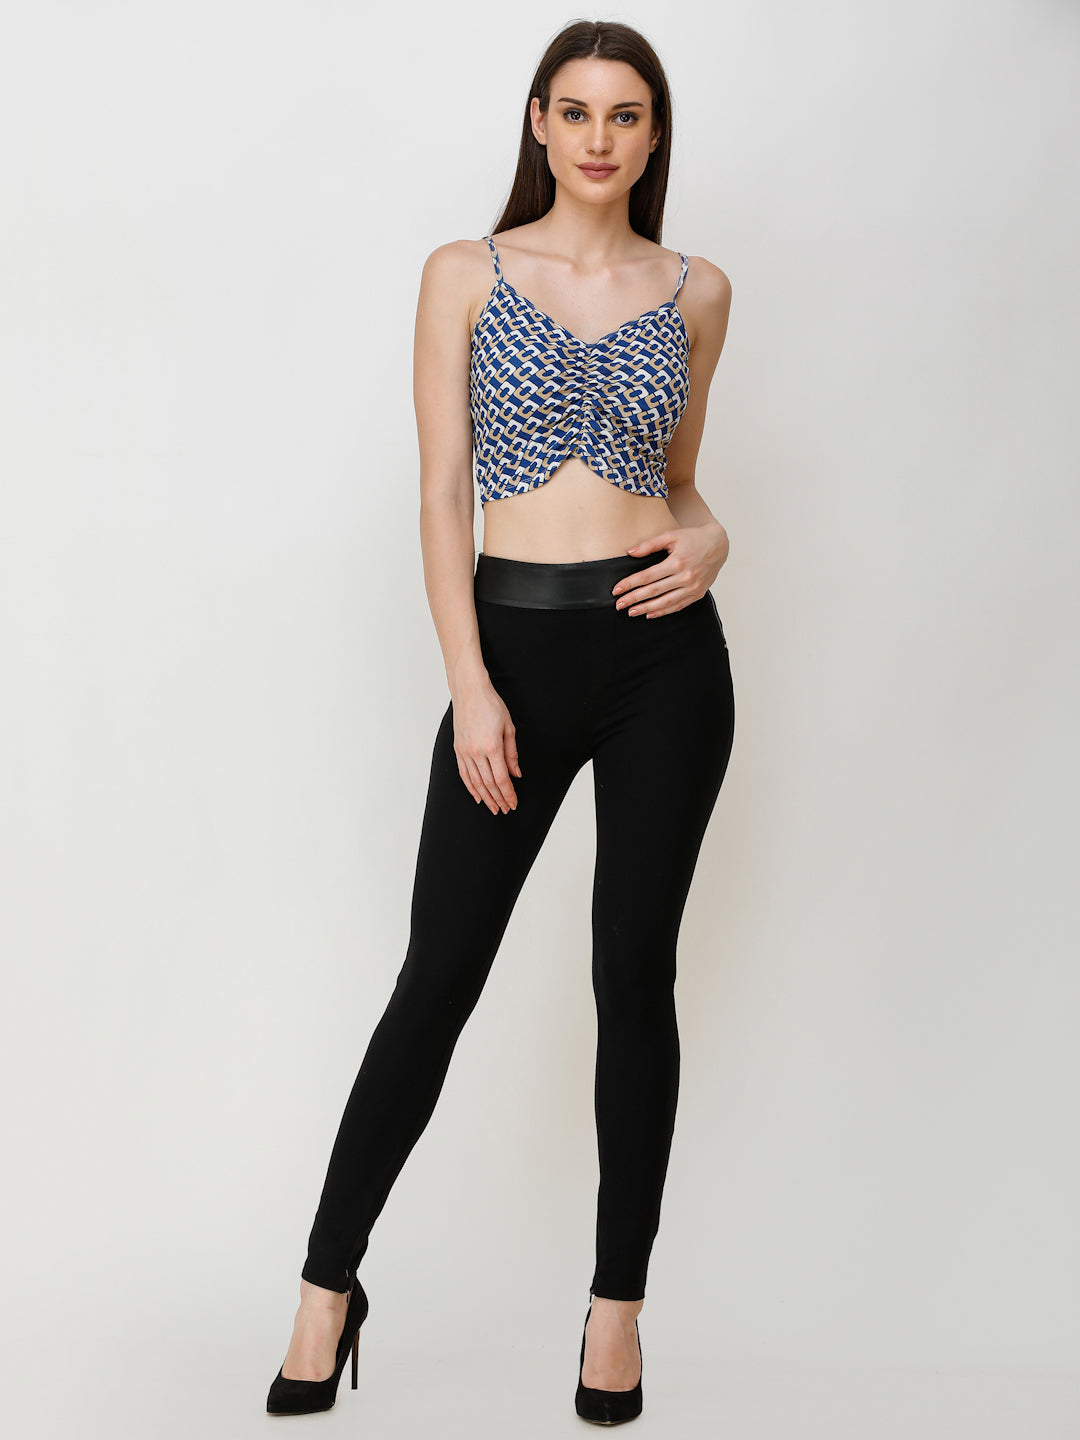 SCORPIUS Women Blue & White Printed Fitted Crop Top